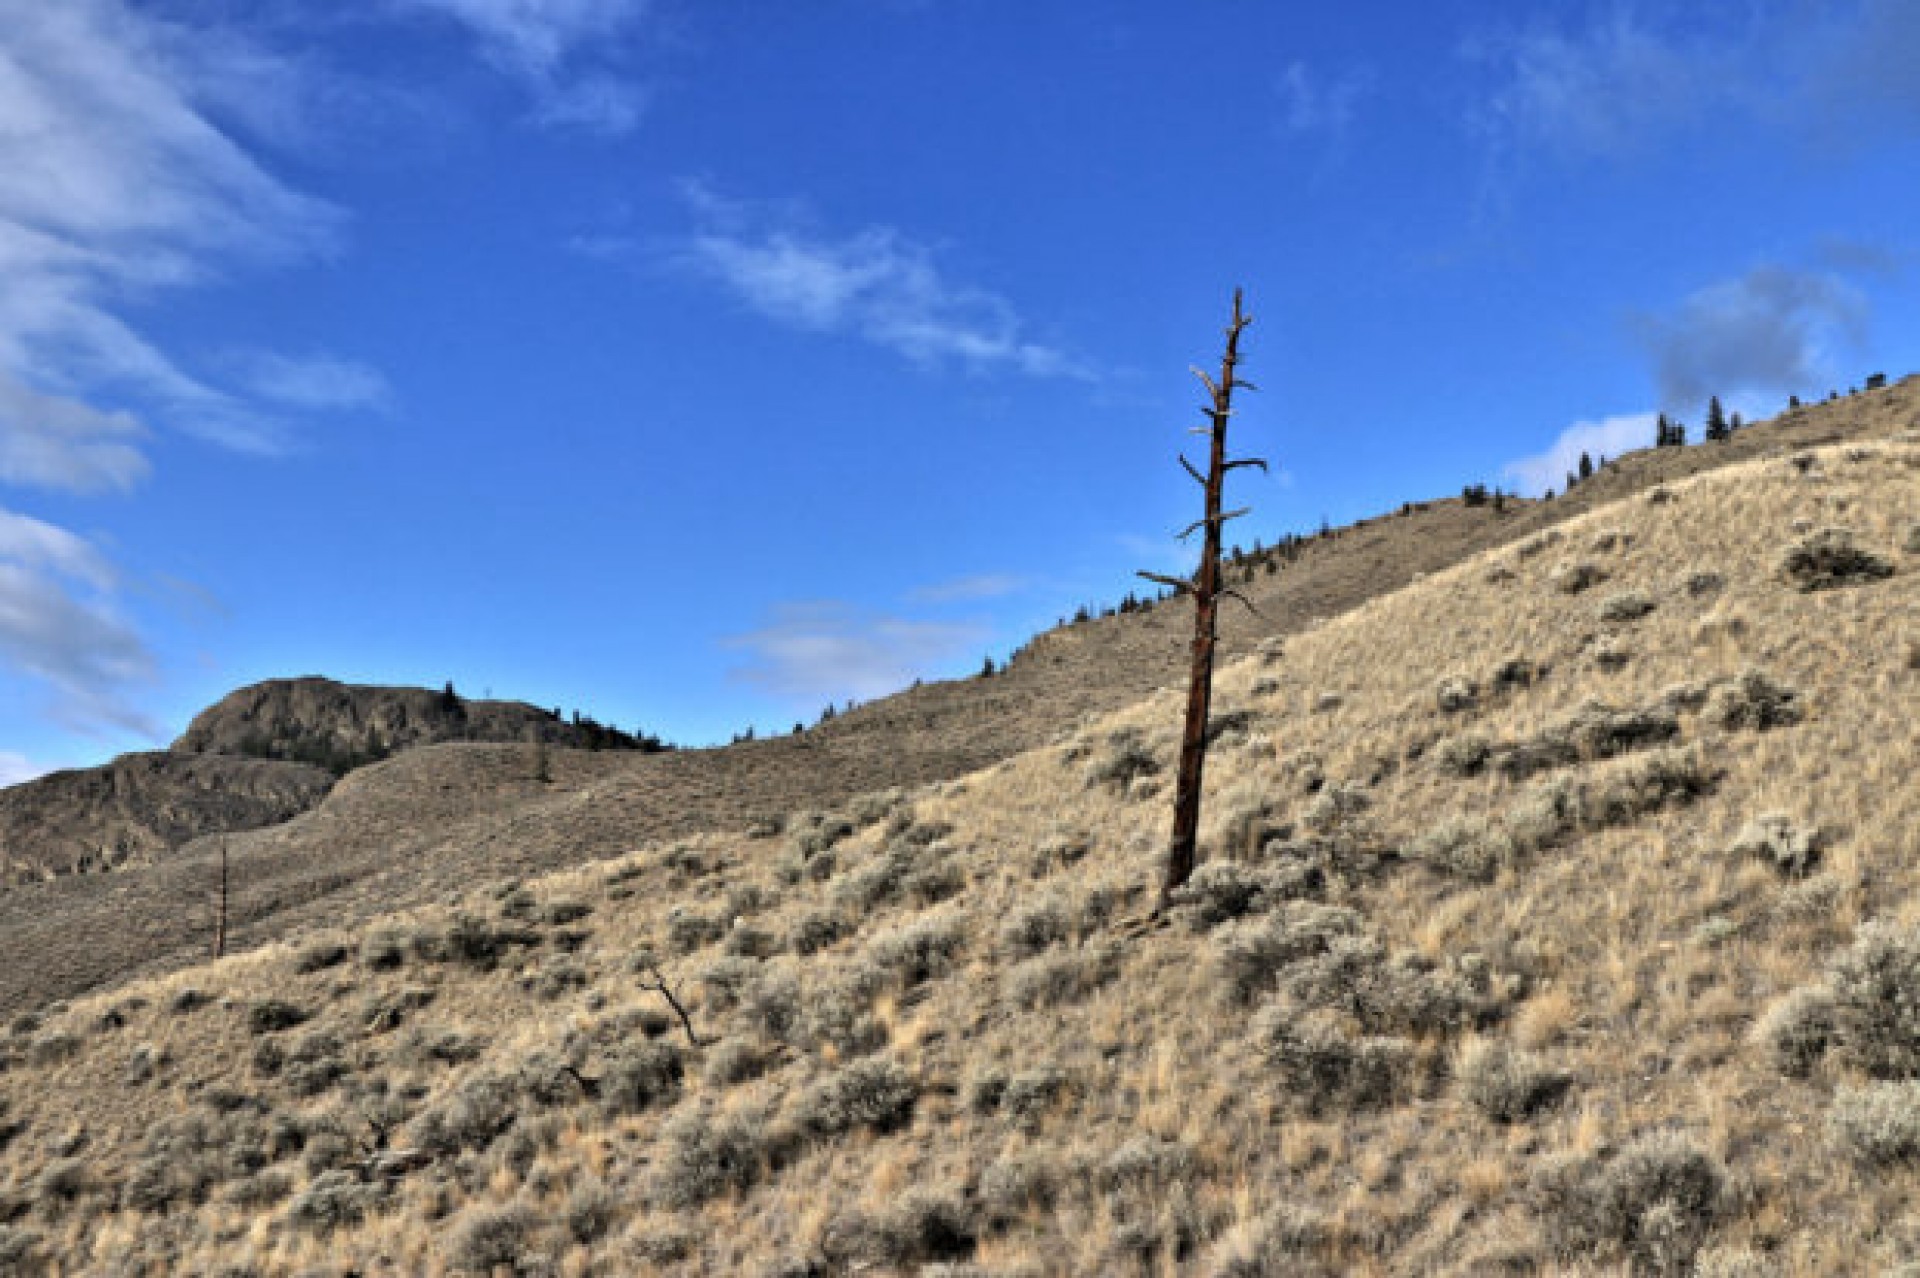 Tranquille Hills Fossil Beds - Kamloops Trails